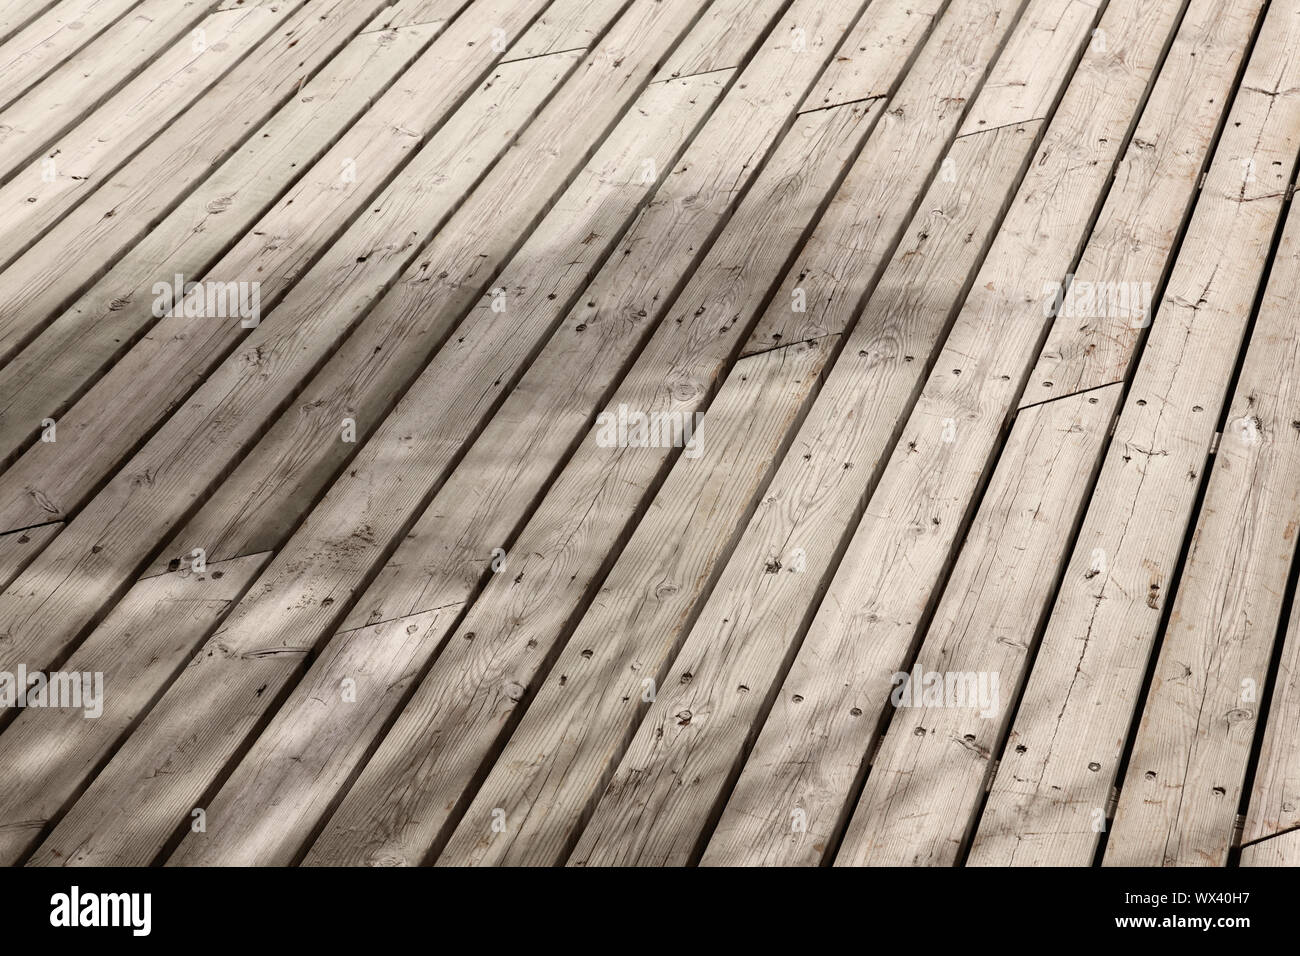 Rustic wood planks, with beautiful palm shadows Stock Photo